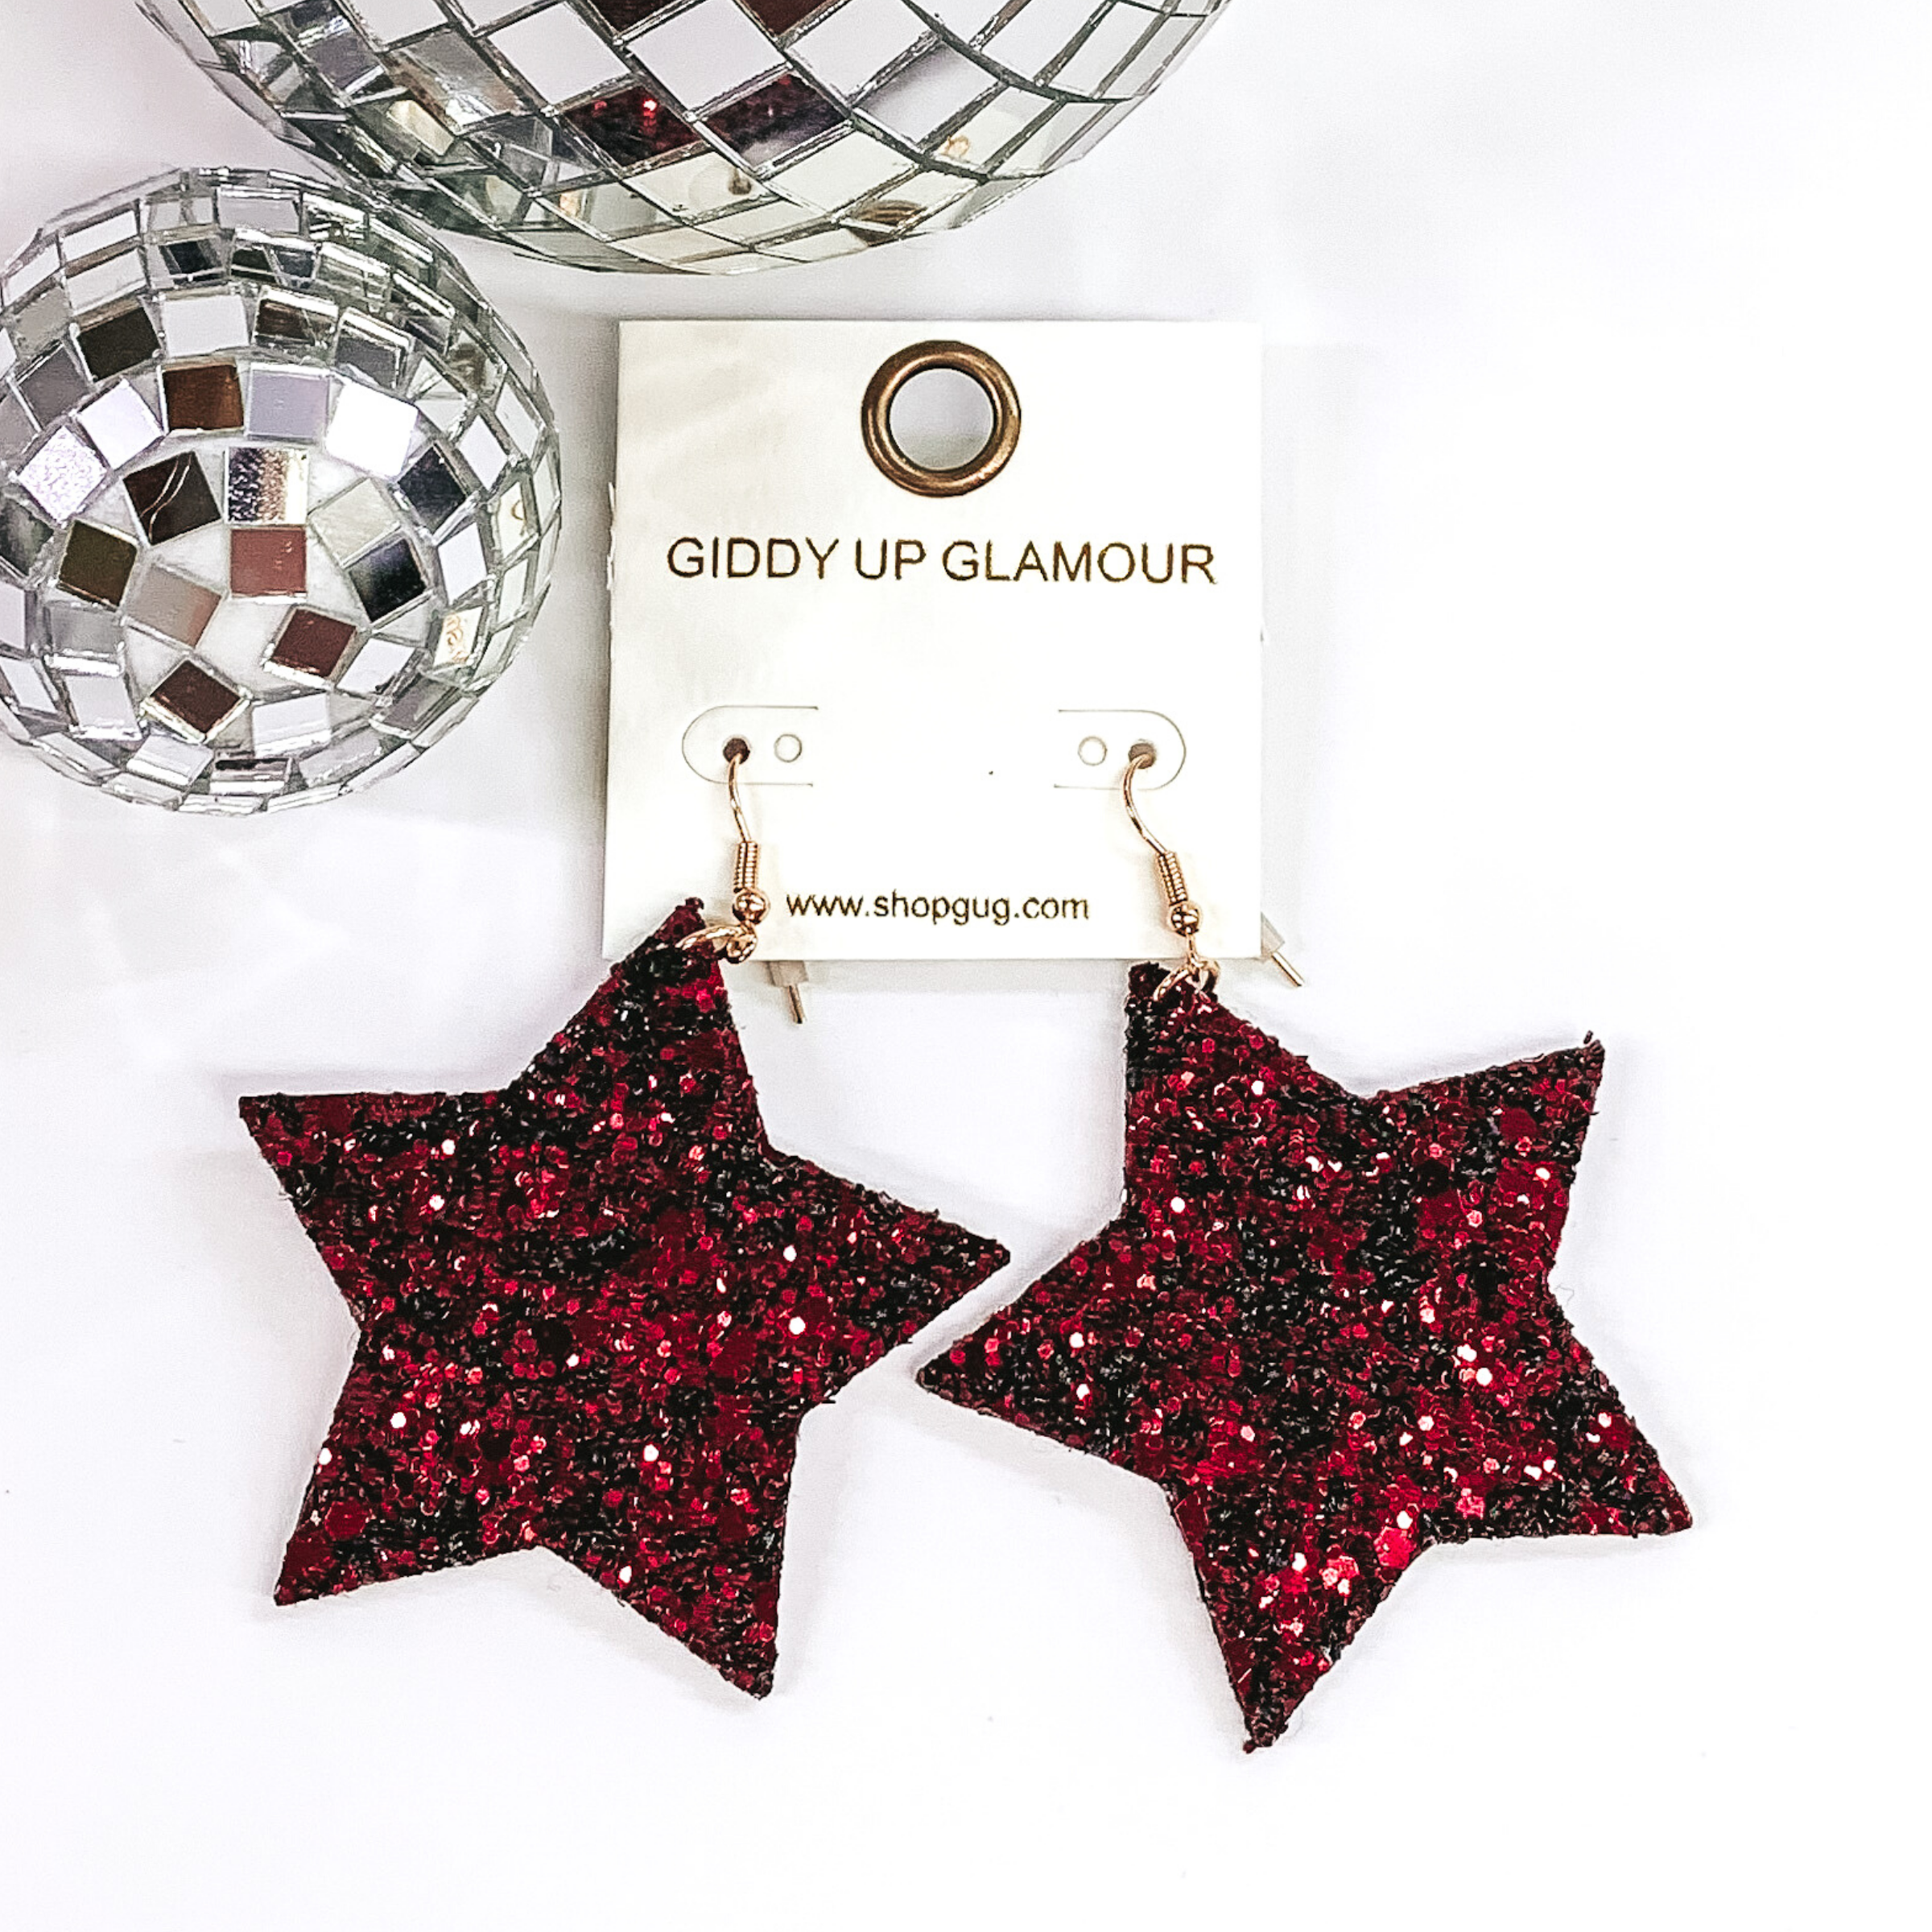 Glitter star dangle earrings in burgundy with a gold earrings hook. These earrings are pictured on a white background with a disco ball at the top of the picture.